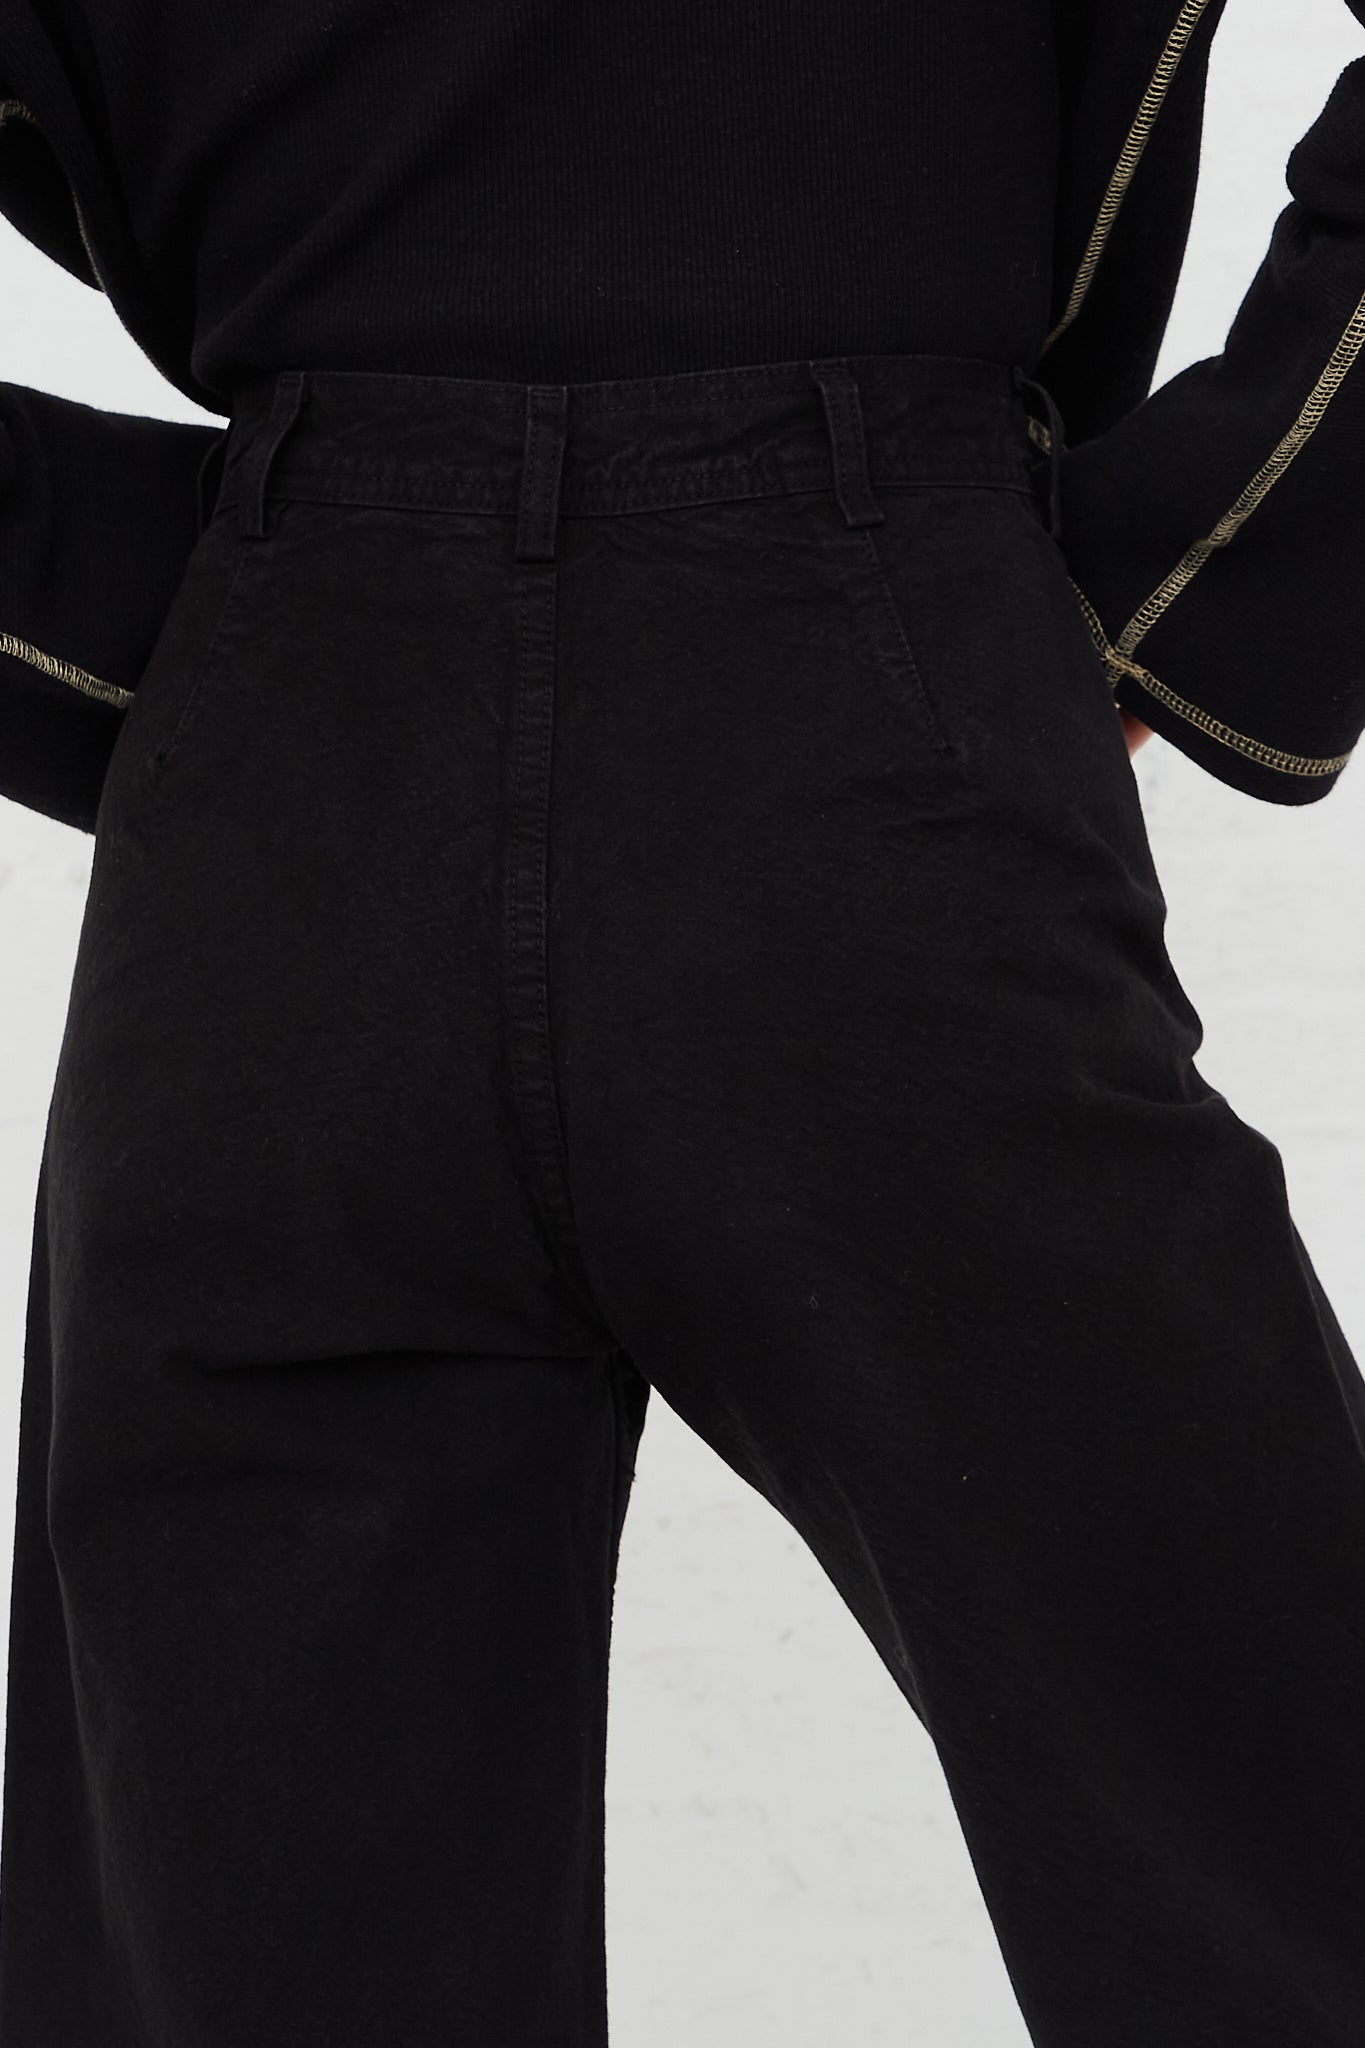 Organic Cotton Canvas Sailor Pant in Black by Jesse Kamm for Oroboro Back Upclose